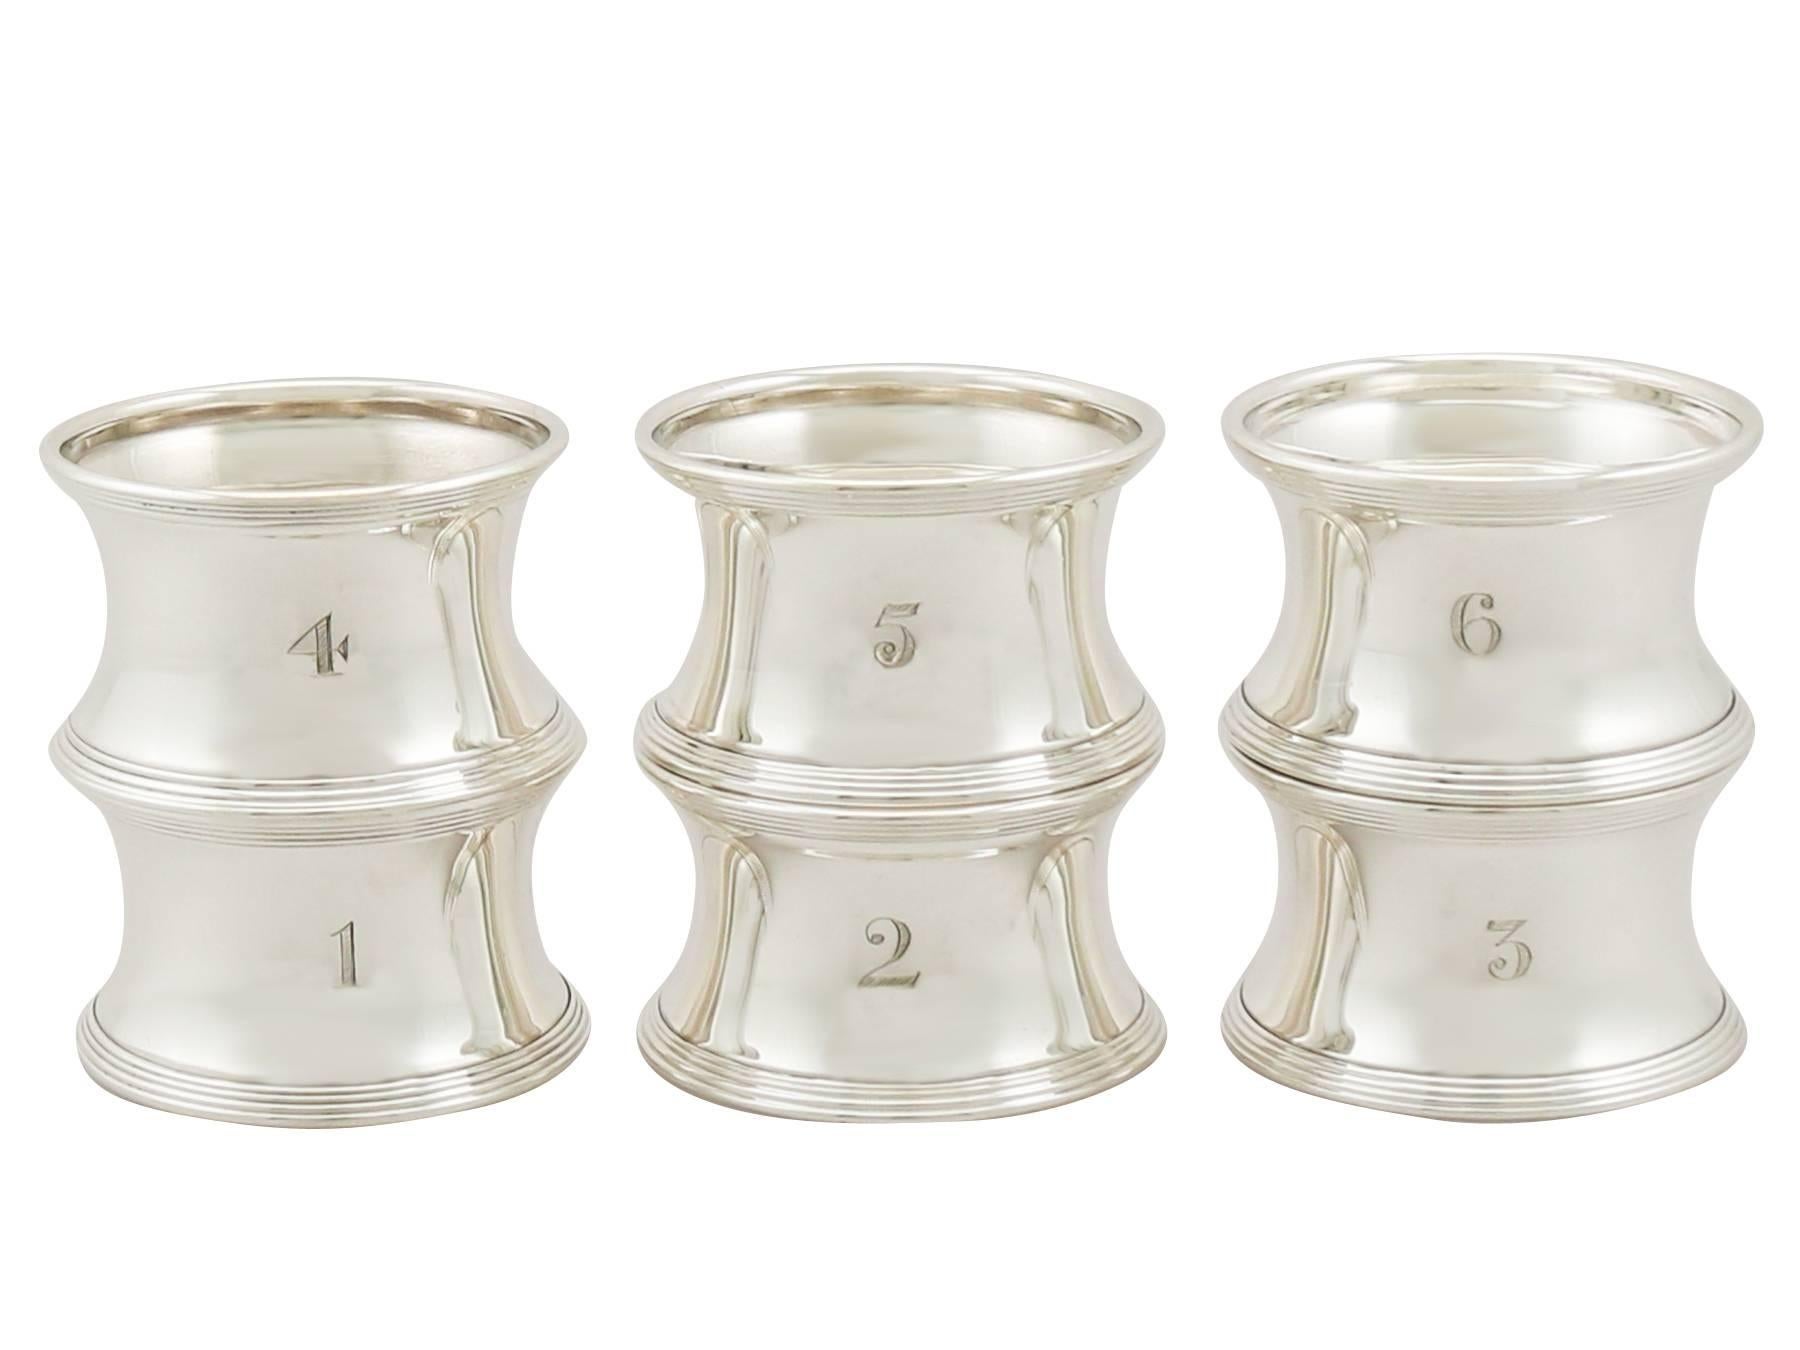 A fine and impressive set of six individually numbered antique George V English sterling silver napkin rings, boxed; part of our silver dining collection.

These fine set of antique numbered napkin rings consists of six napkin rings, each with a